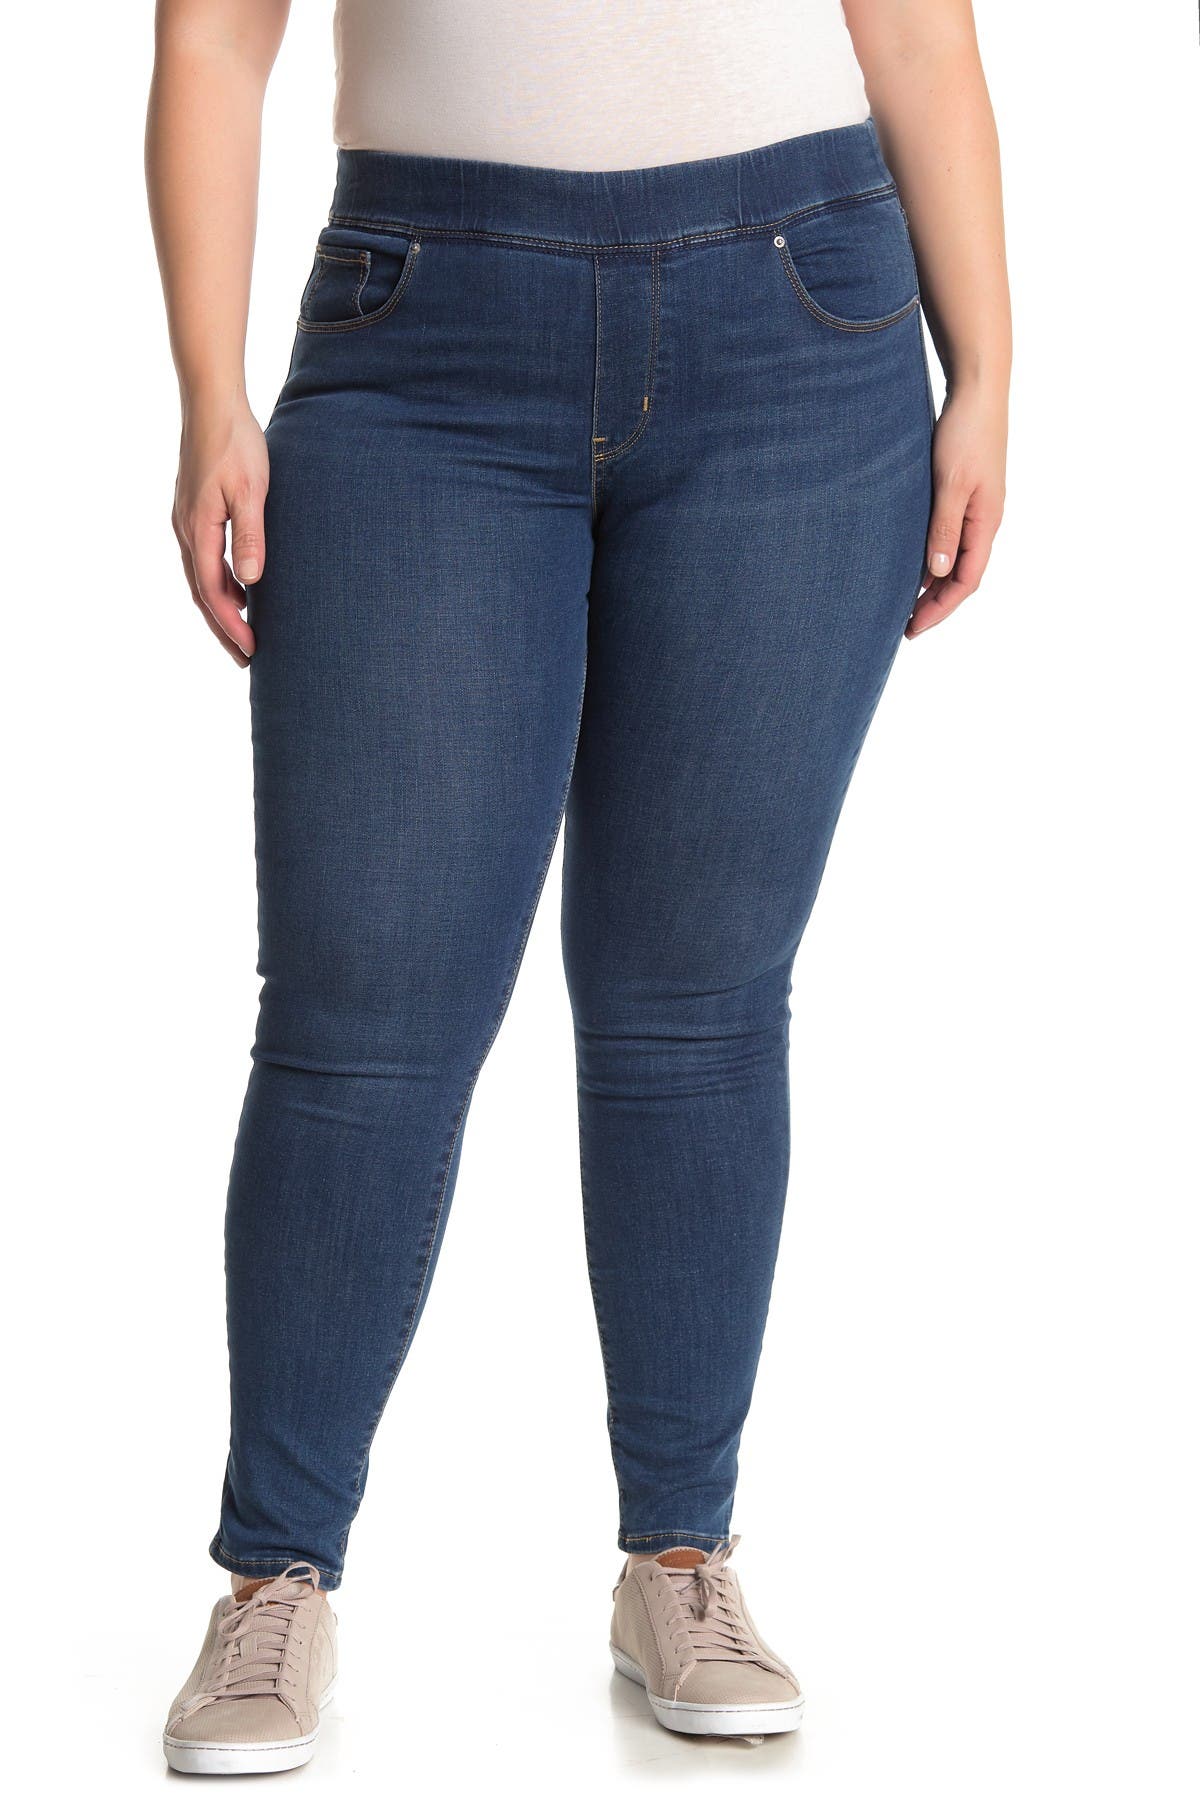 plus size jeggings canada